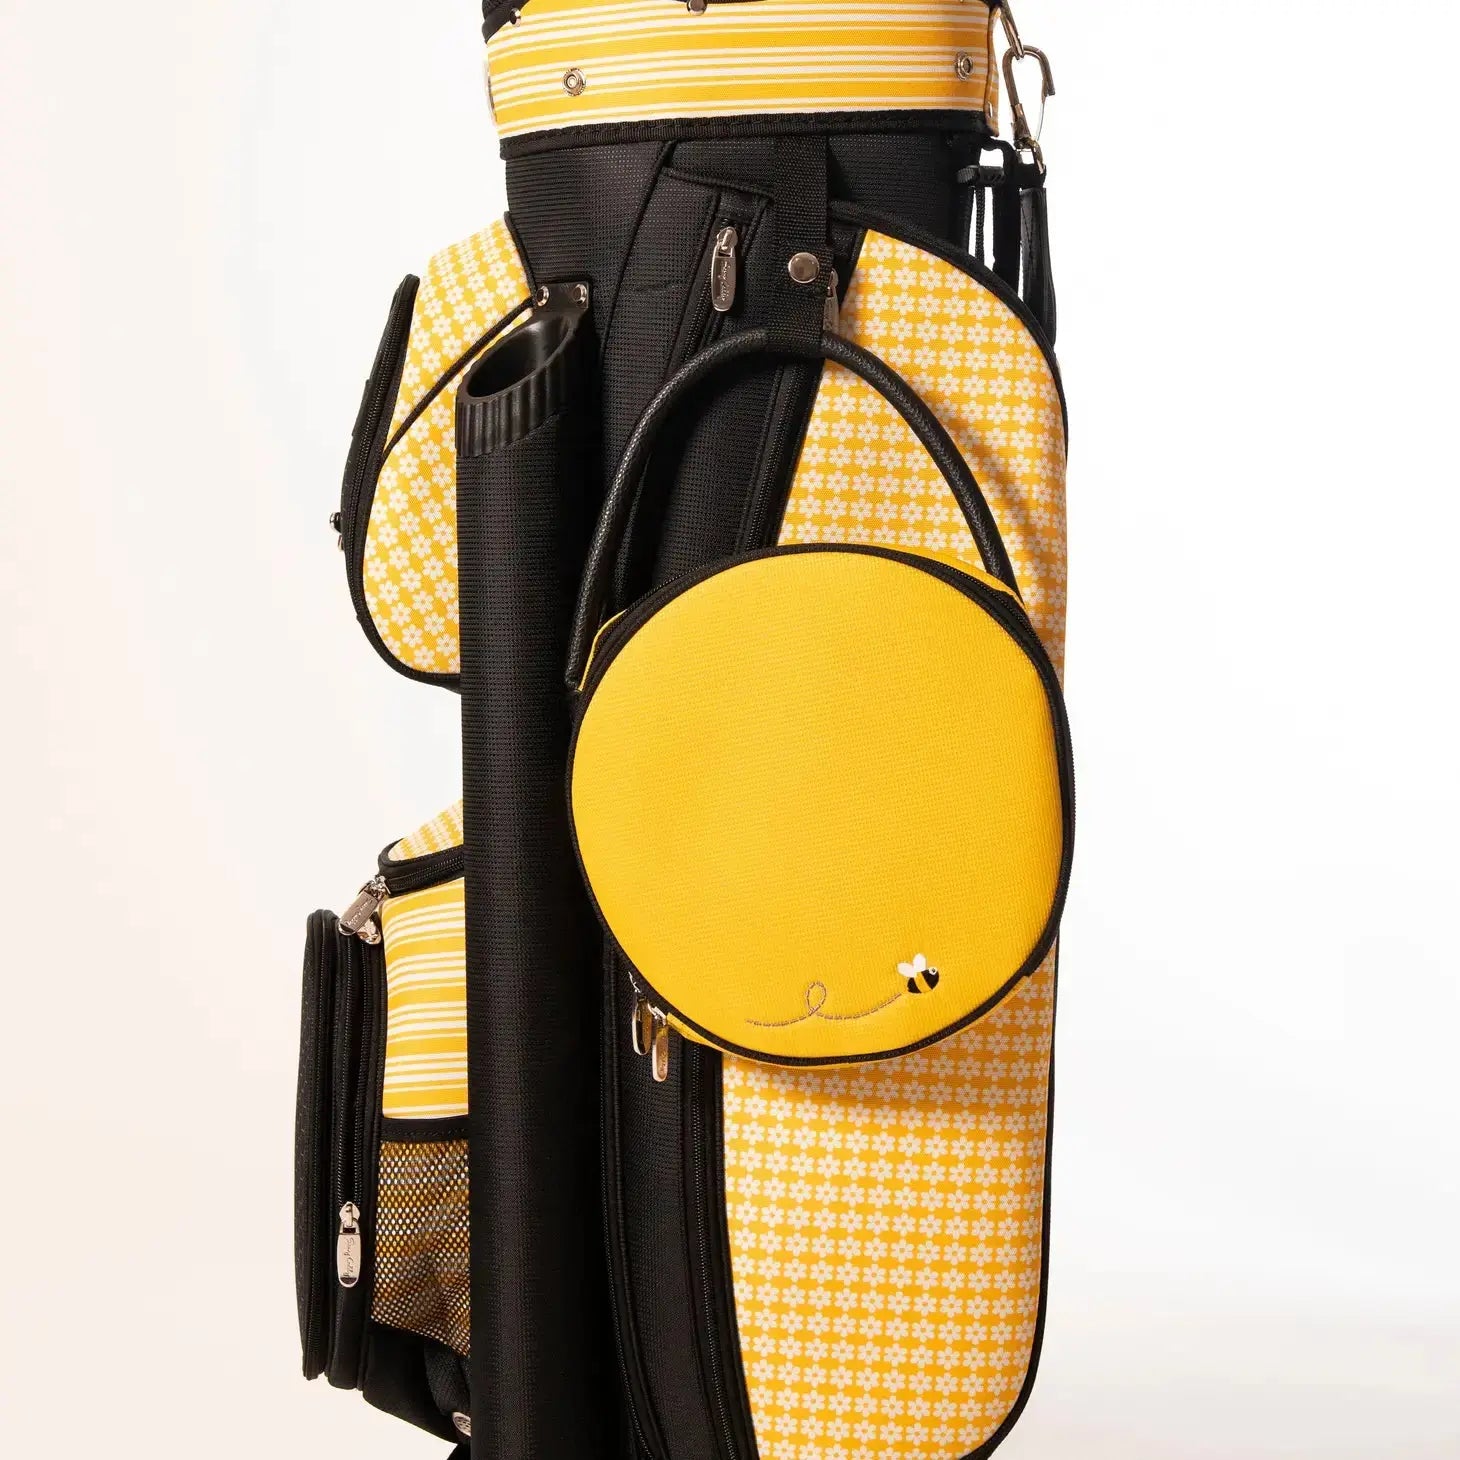 Daisy Golf Cart Bag from Runway Athletics. This playful daisy print, along with our black honeycomb fabric, is a striking combination.